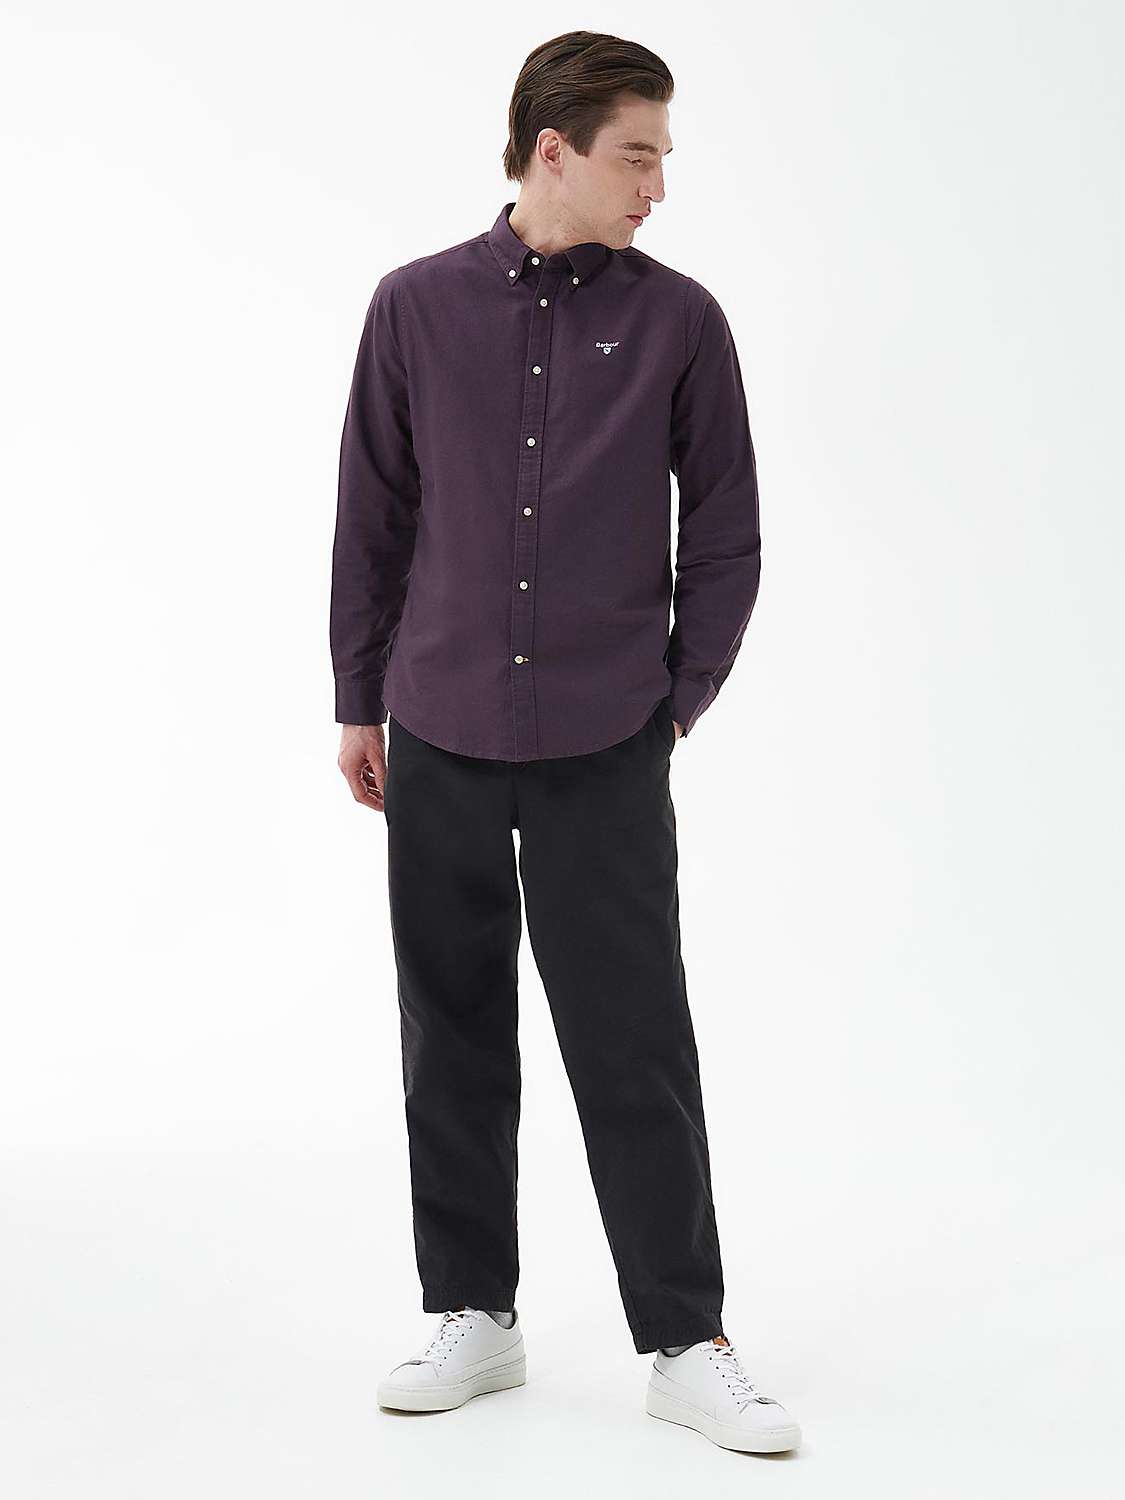 Buy Barbour Tailored Fit Oxford Shirt, Fig Online at johnlewis.com